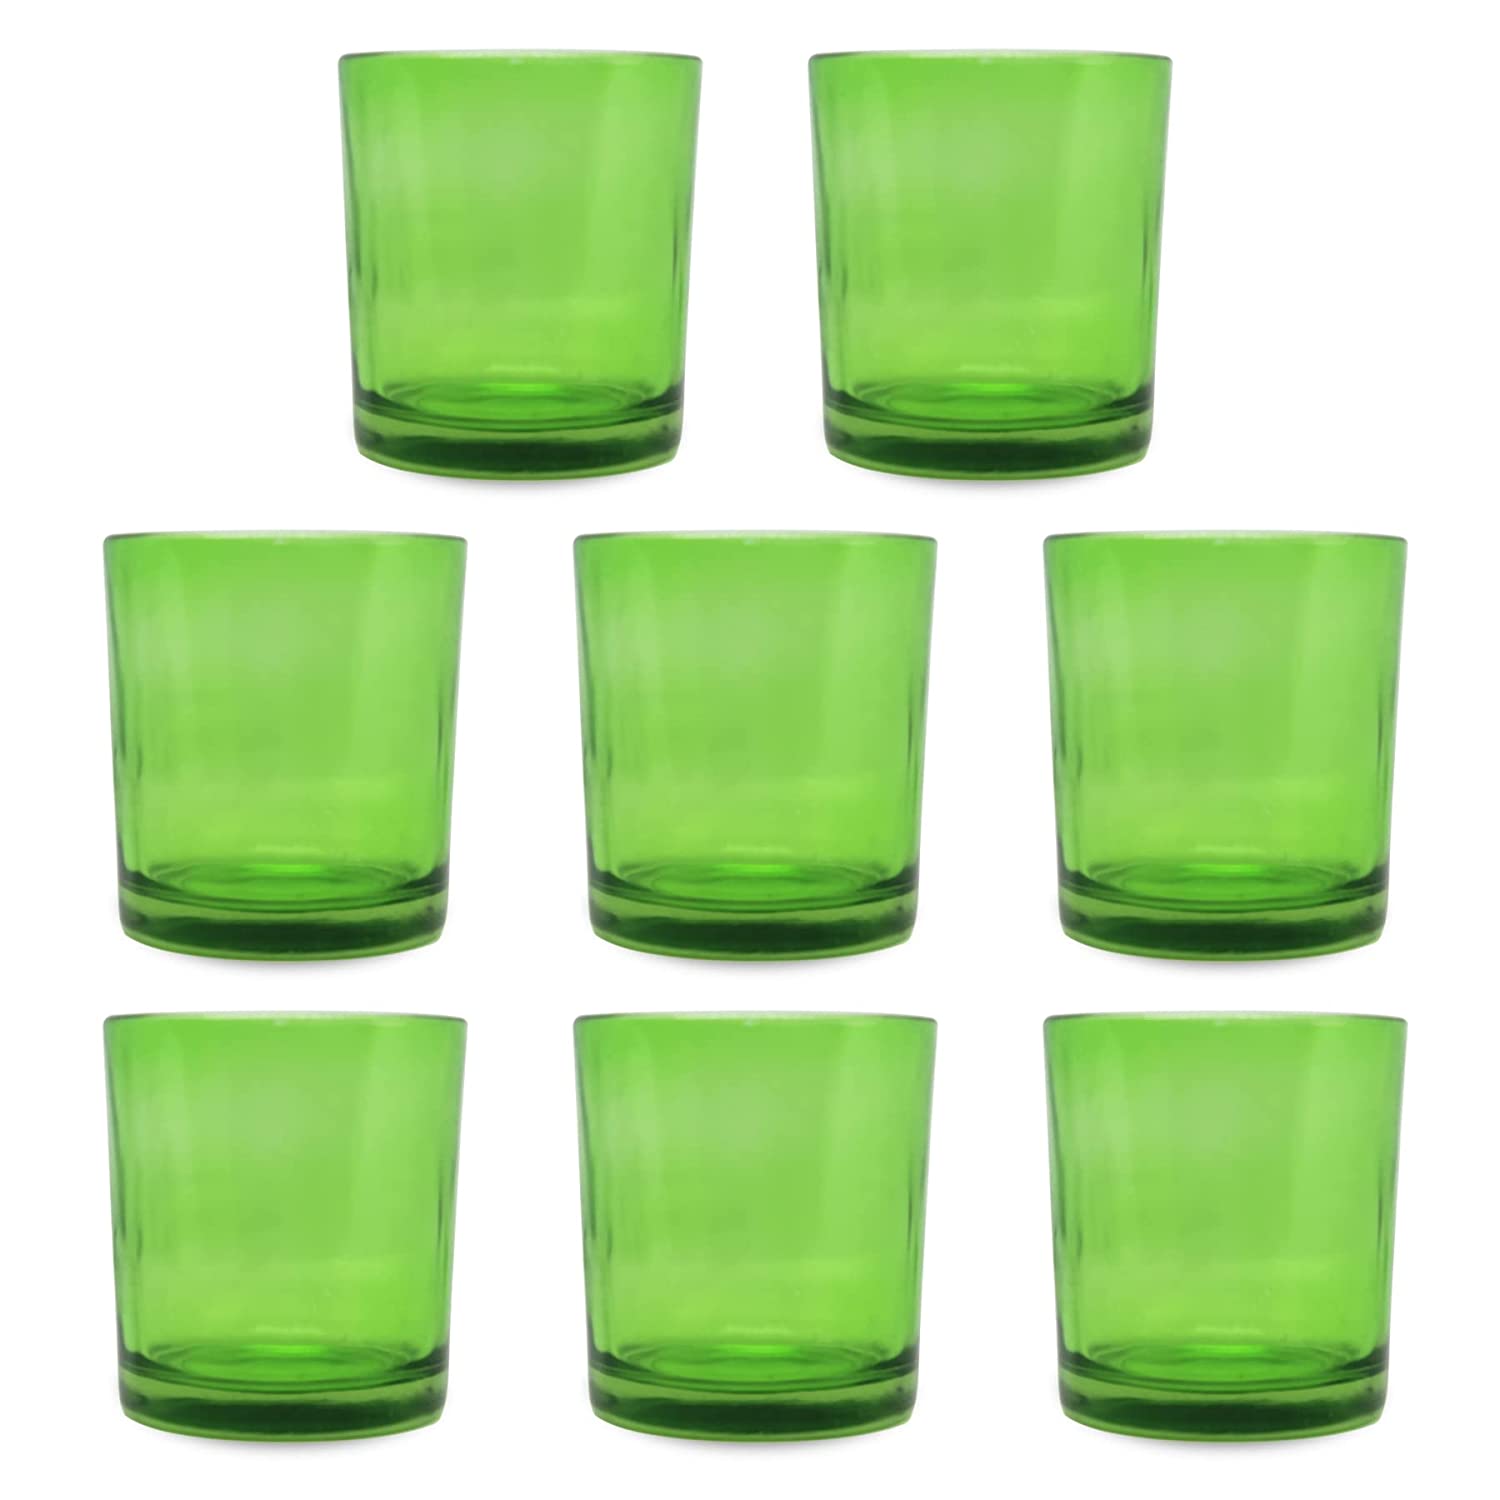 Shoprythm Packaging,Cosmetic Jar Pack of 8 Green glass candle jar